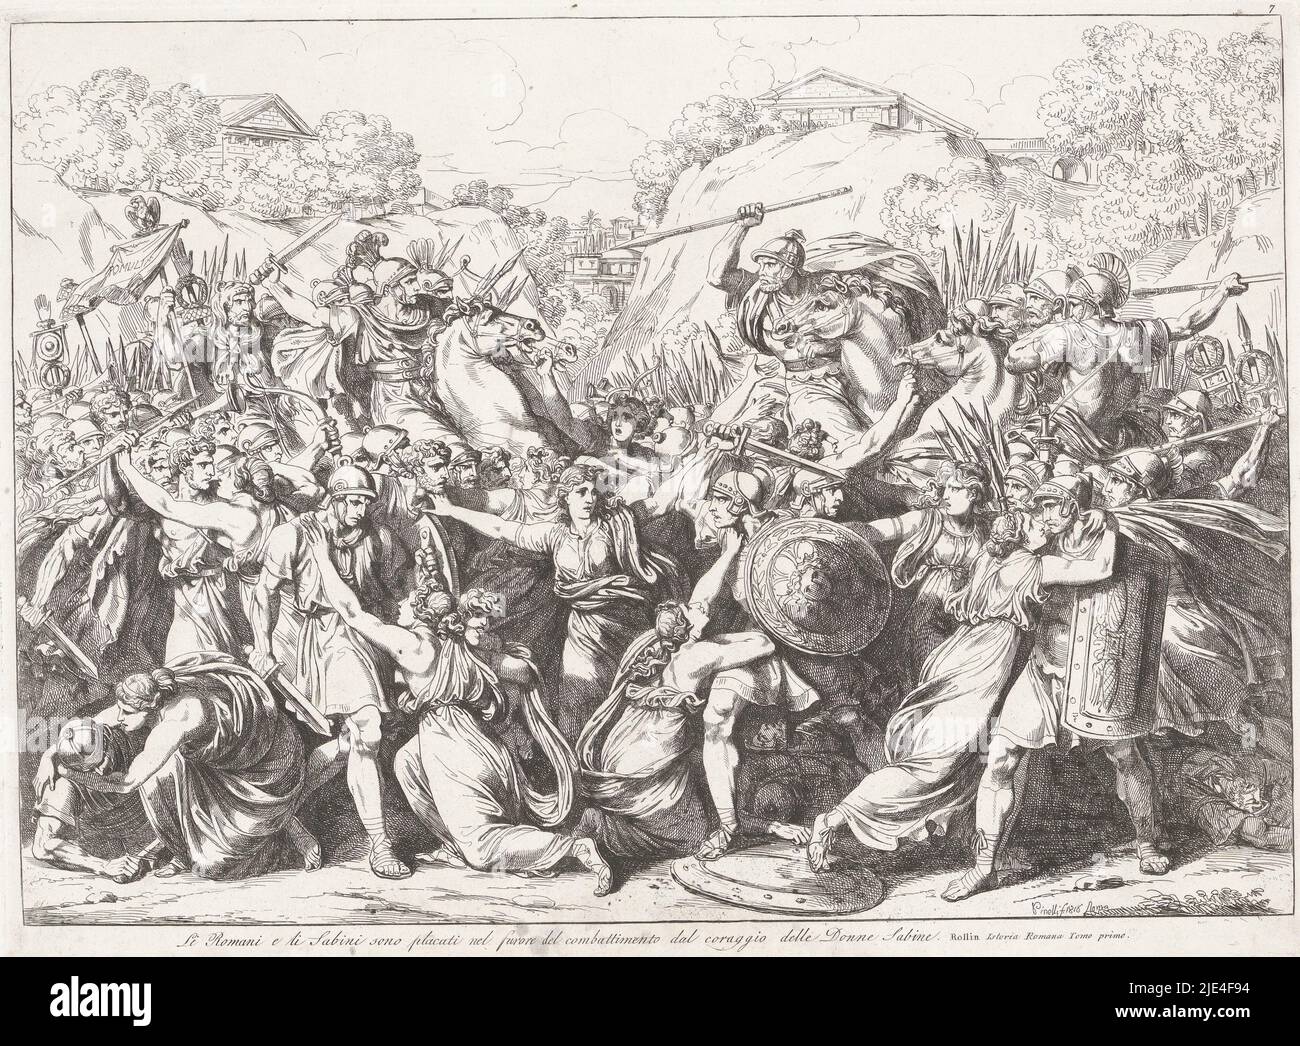 Reconciliation between the Romans and the Sabines, Bartolomeo Pinelli, 1818, The Sabine virgins throw themselves between the two fighting armies of Sabines and Romans. They make a call for peace., print maker: Bartolomeo Pinelli, (mentioned on object), Bartolomeo Pinelli, (mentioned on object), Rome, 1818, paper, etching, h 316 mm × w 426 mm Stock Photo